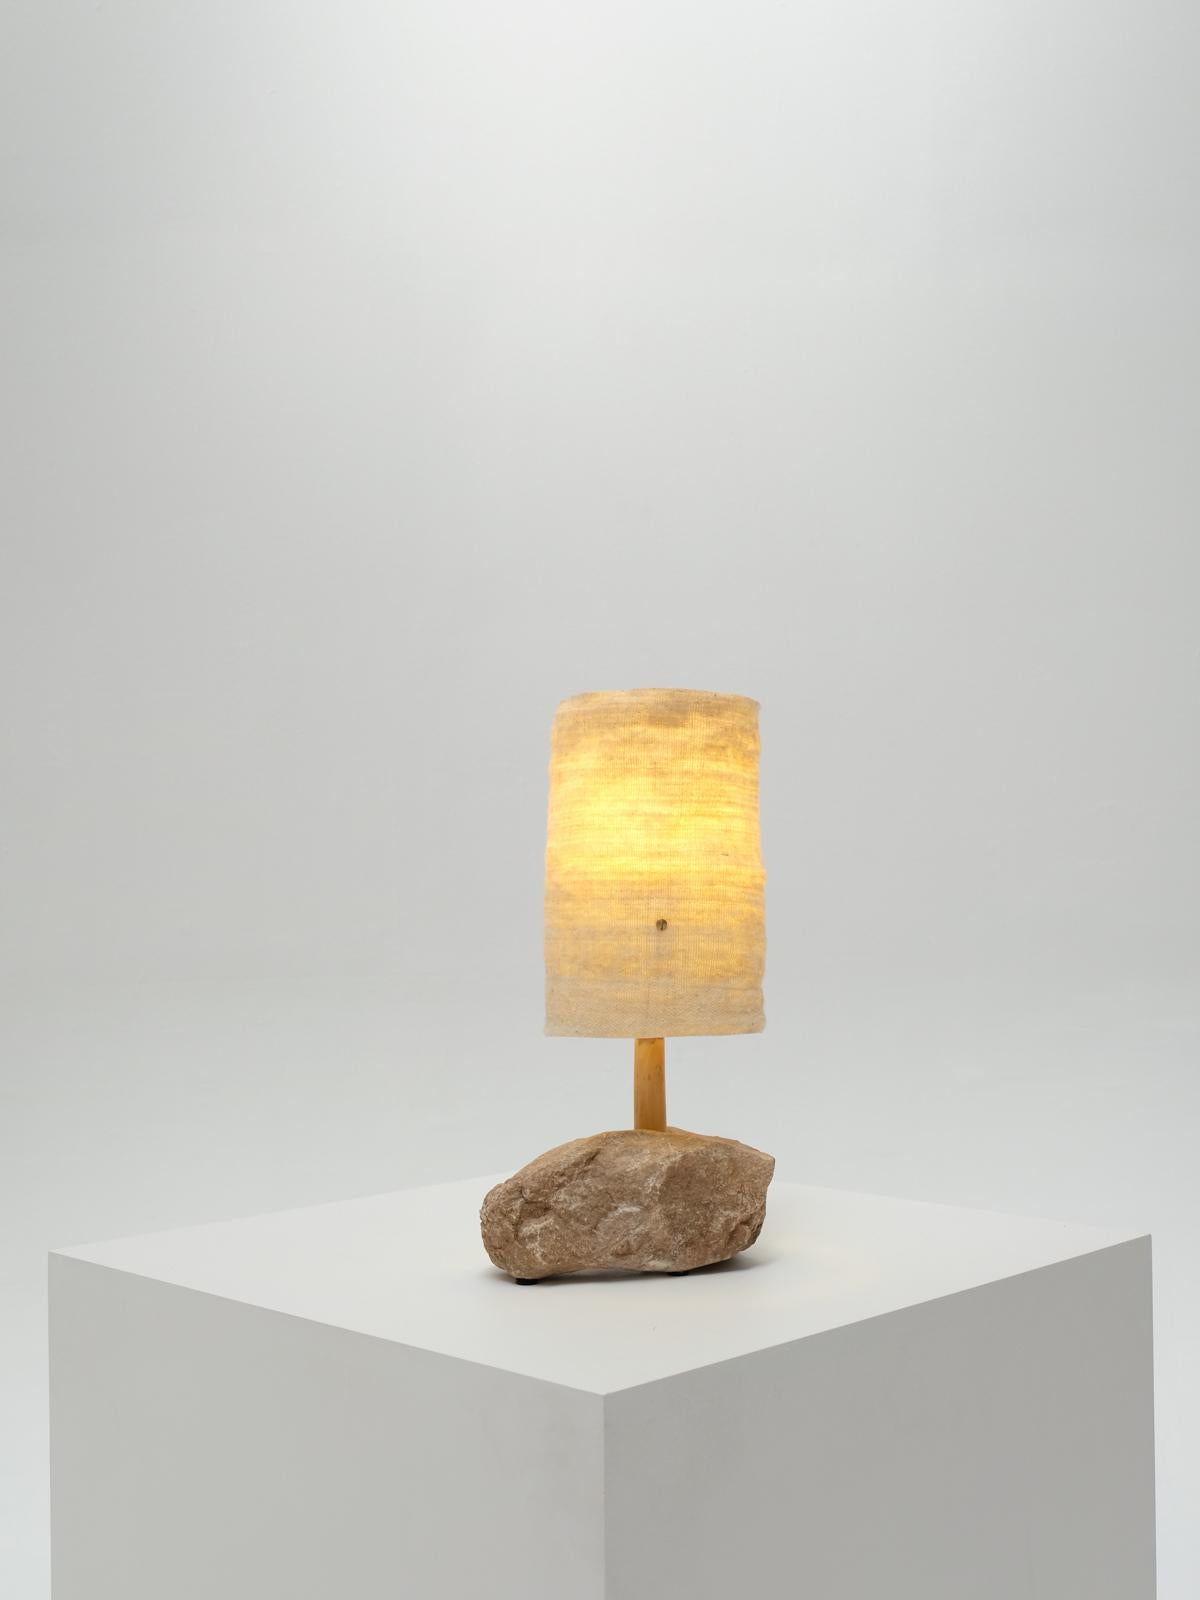 Hjra Table Lamp Small, Handspun, Handwoven wool Lampshade, Made of Rock & Reed For Sale 6